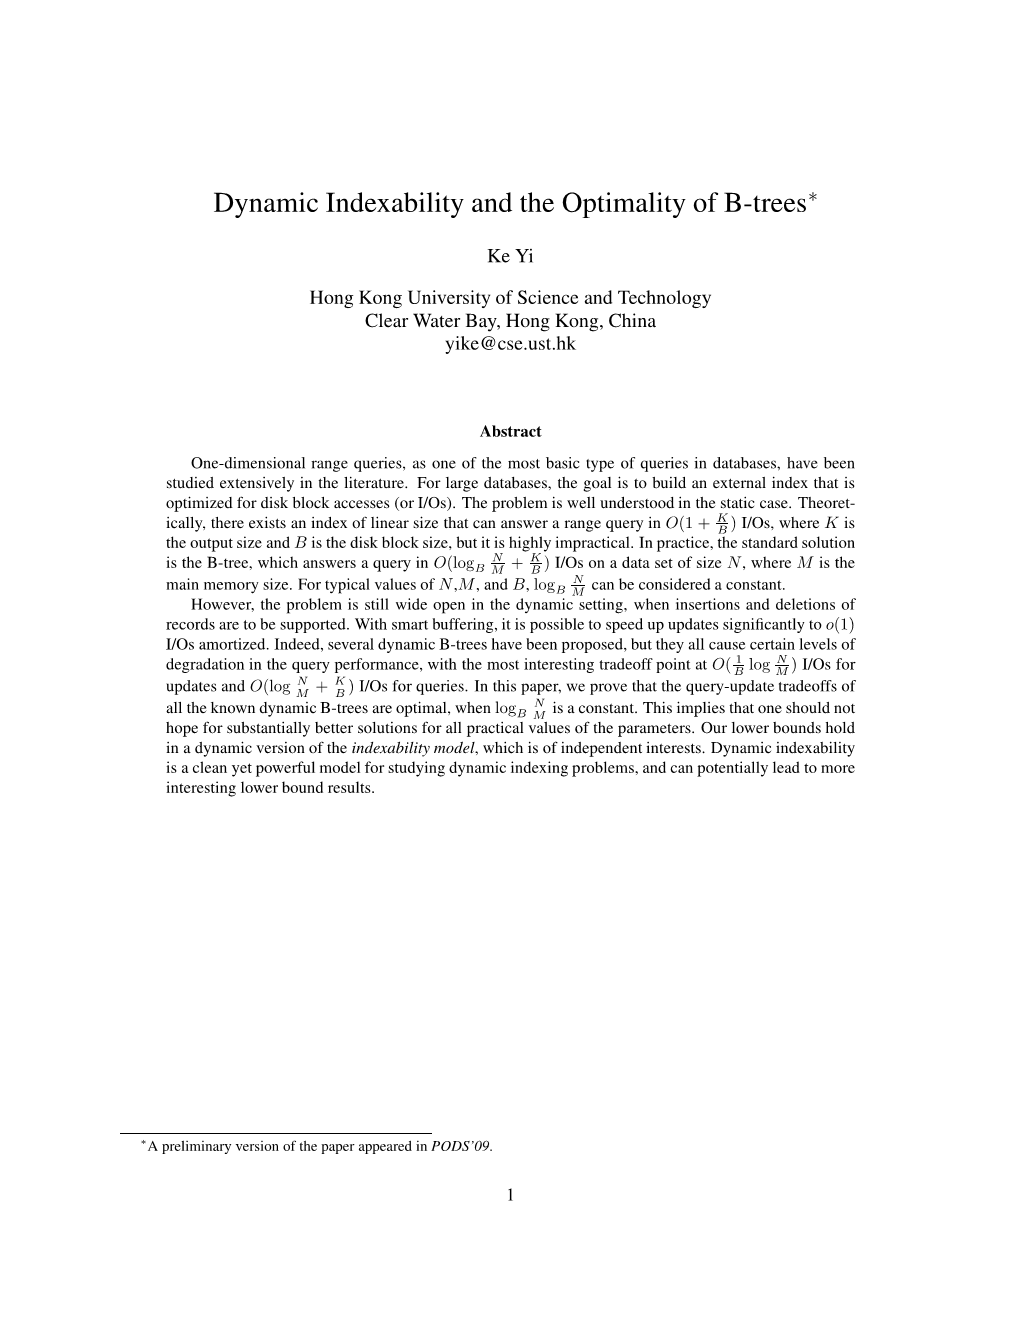 Dynamic Indexability and the Optimality of B-Trees∗